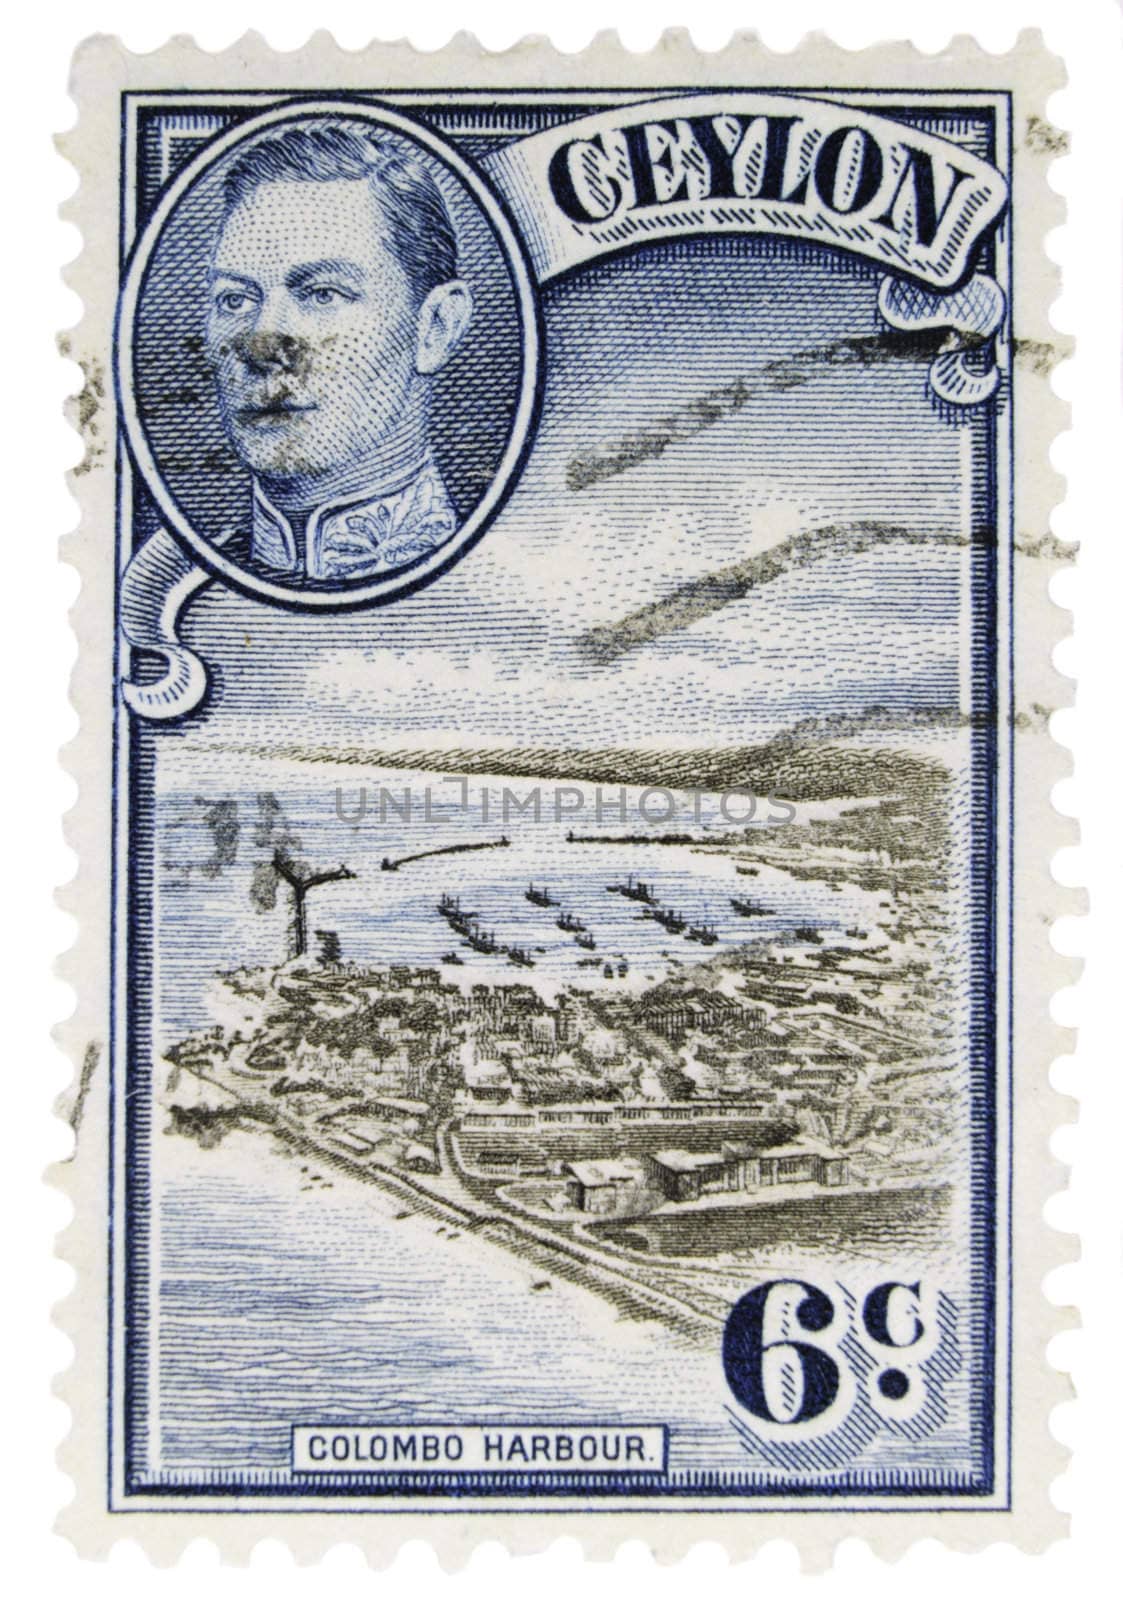 Ceylon - Circa 1950 : A vintage Ceylonese postage stamp image of a harbour and an inset of King George, with inscription of "Colombo Harbour" value of 6 cents, series circa 1950